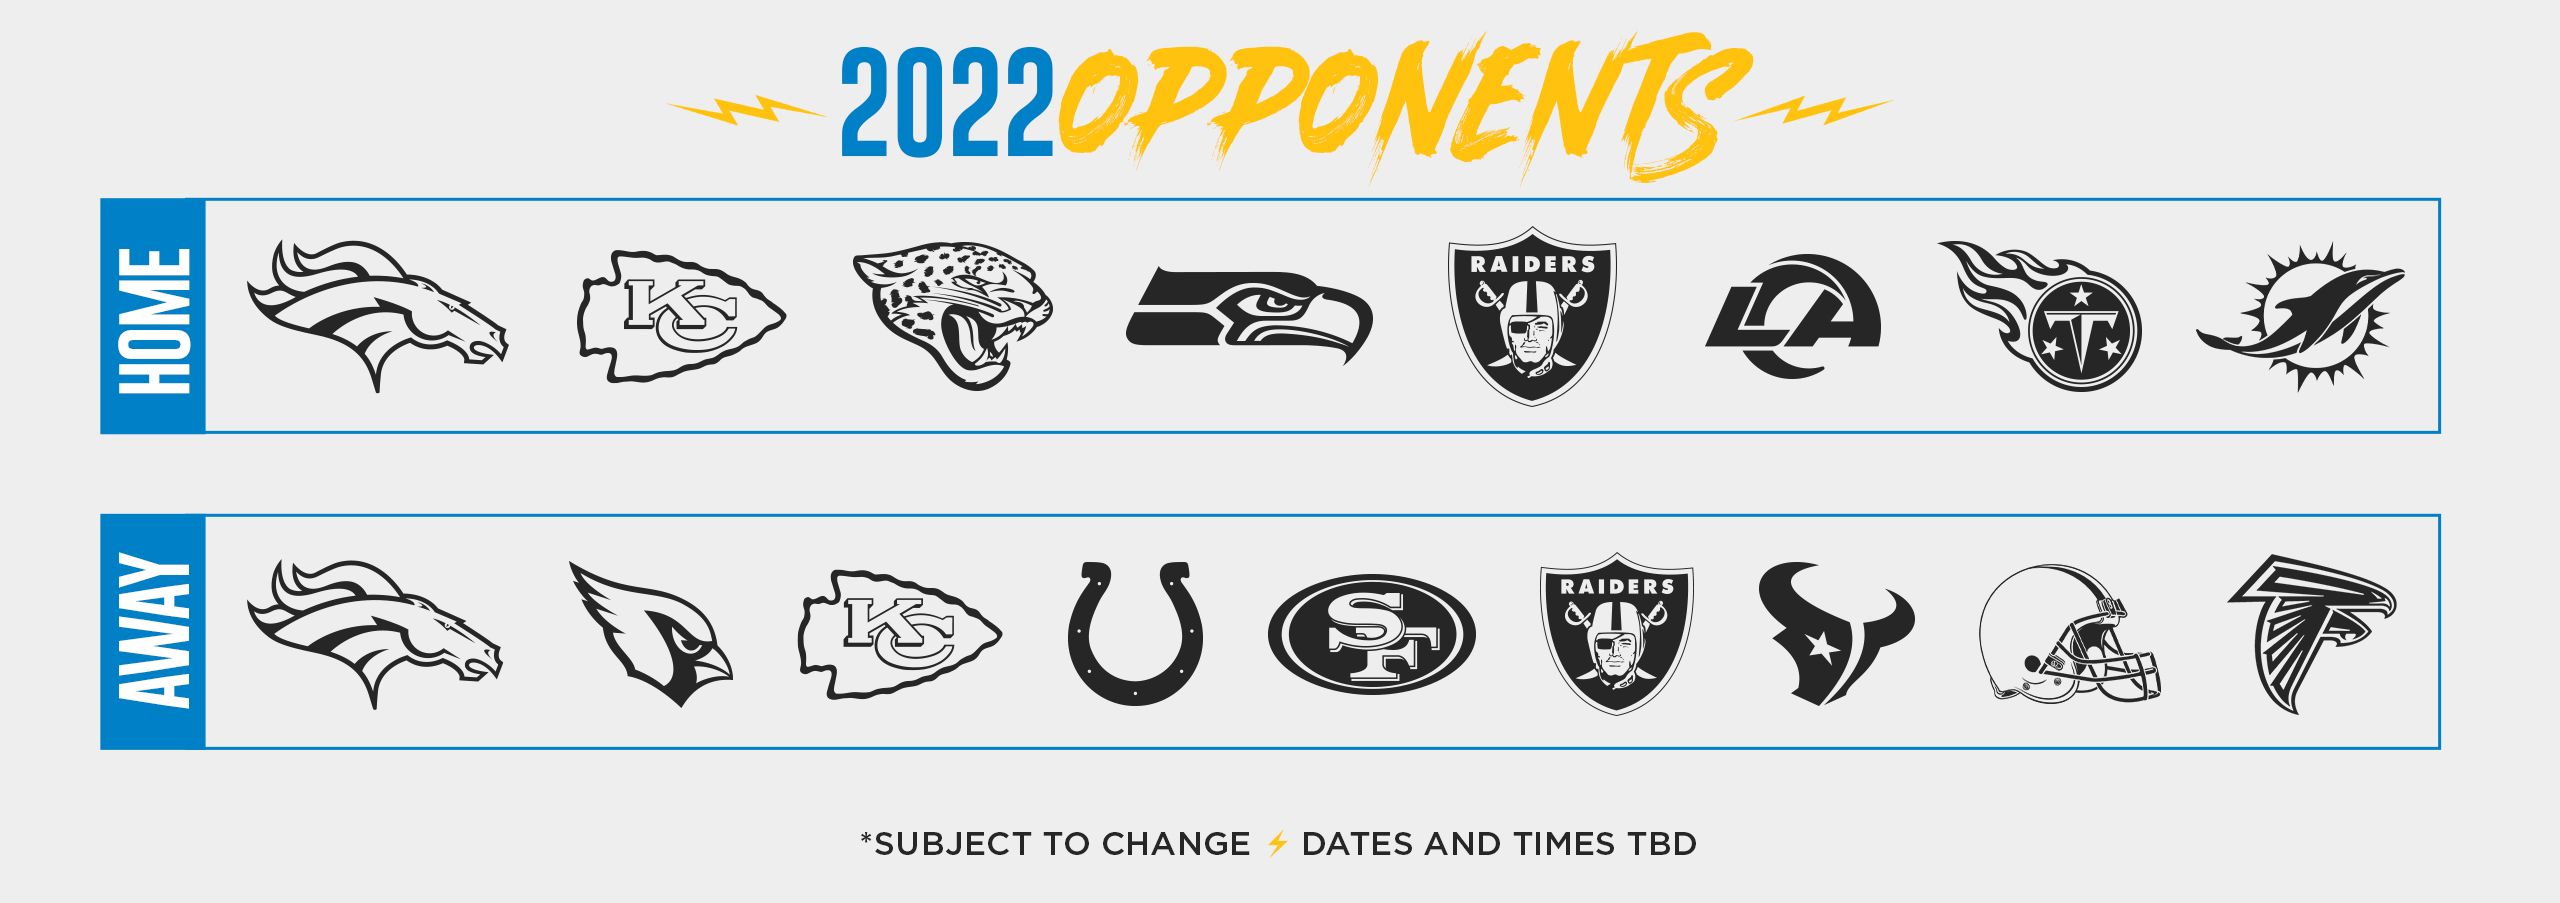 La Chargers 2022 Schedule Chargers 2022 Future Opponents | Los Angeles Chargers - Chargers.com